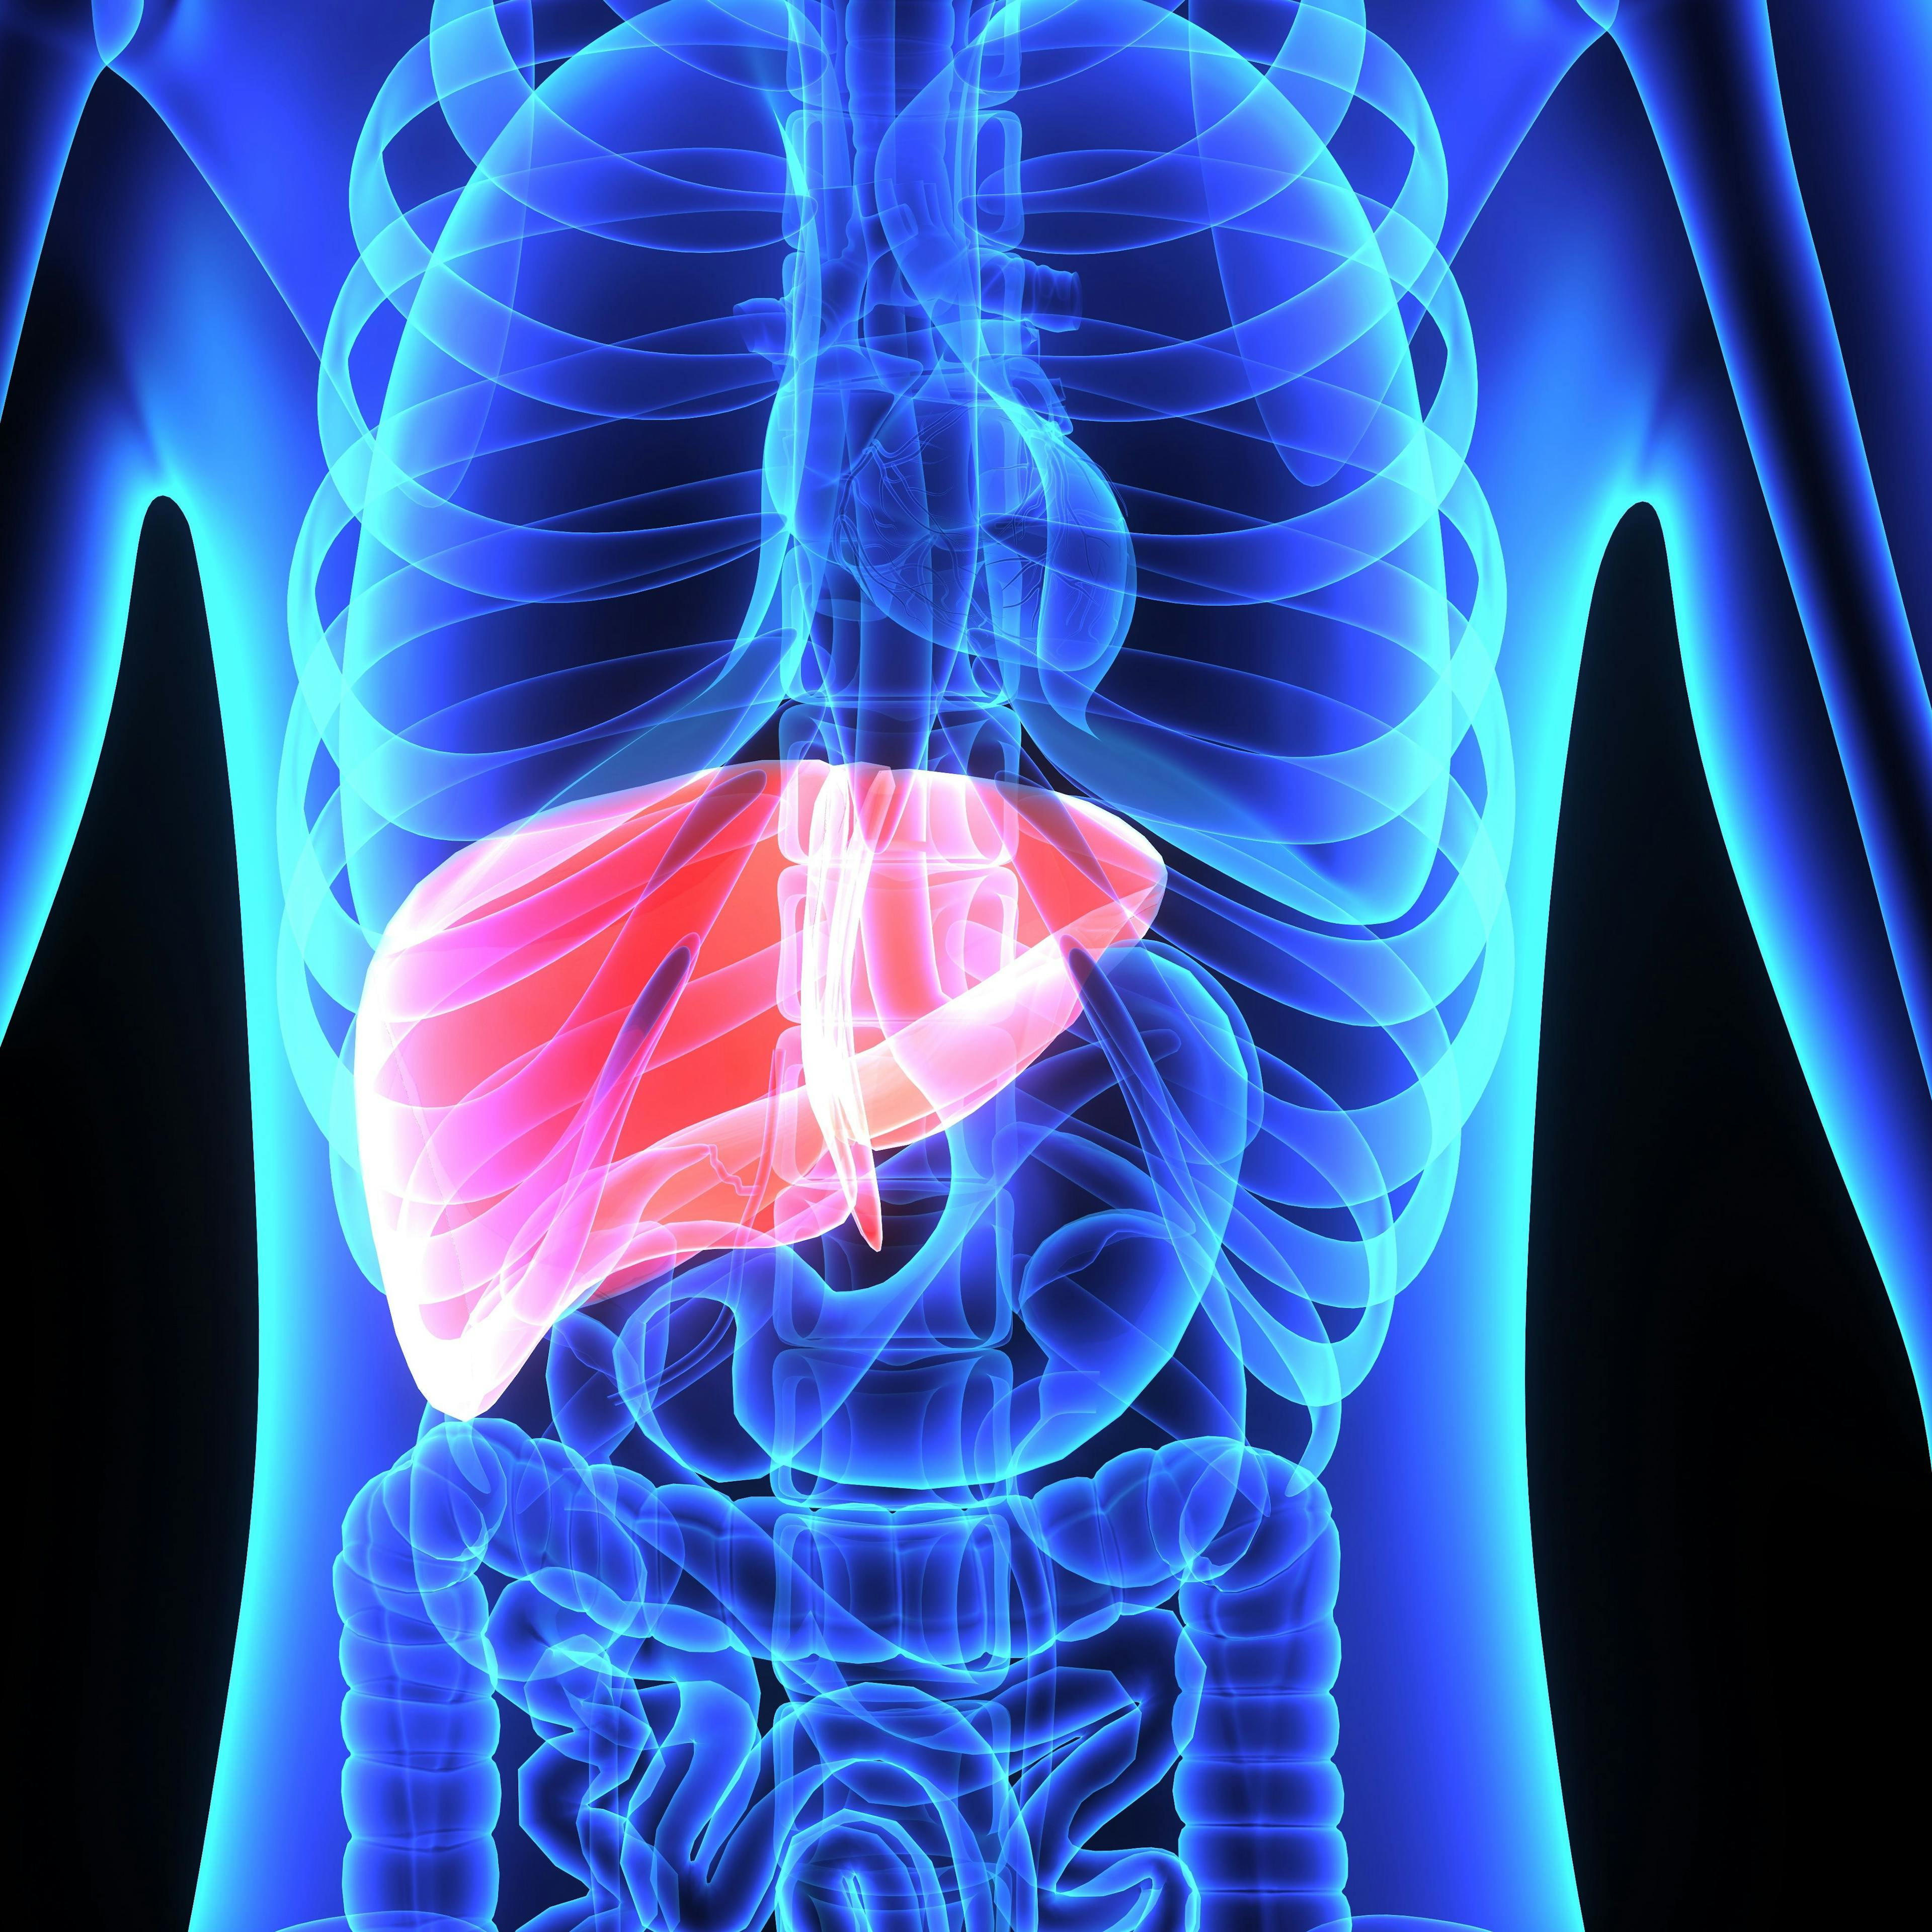 Minimally Invasive Procedure Combined with Lenvima and Checkpoint Blockade Shows Promise in Unresectable Liver Cancer